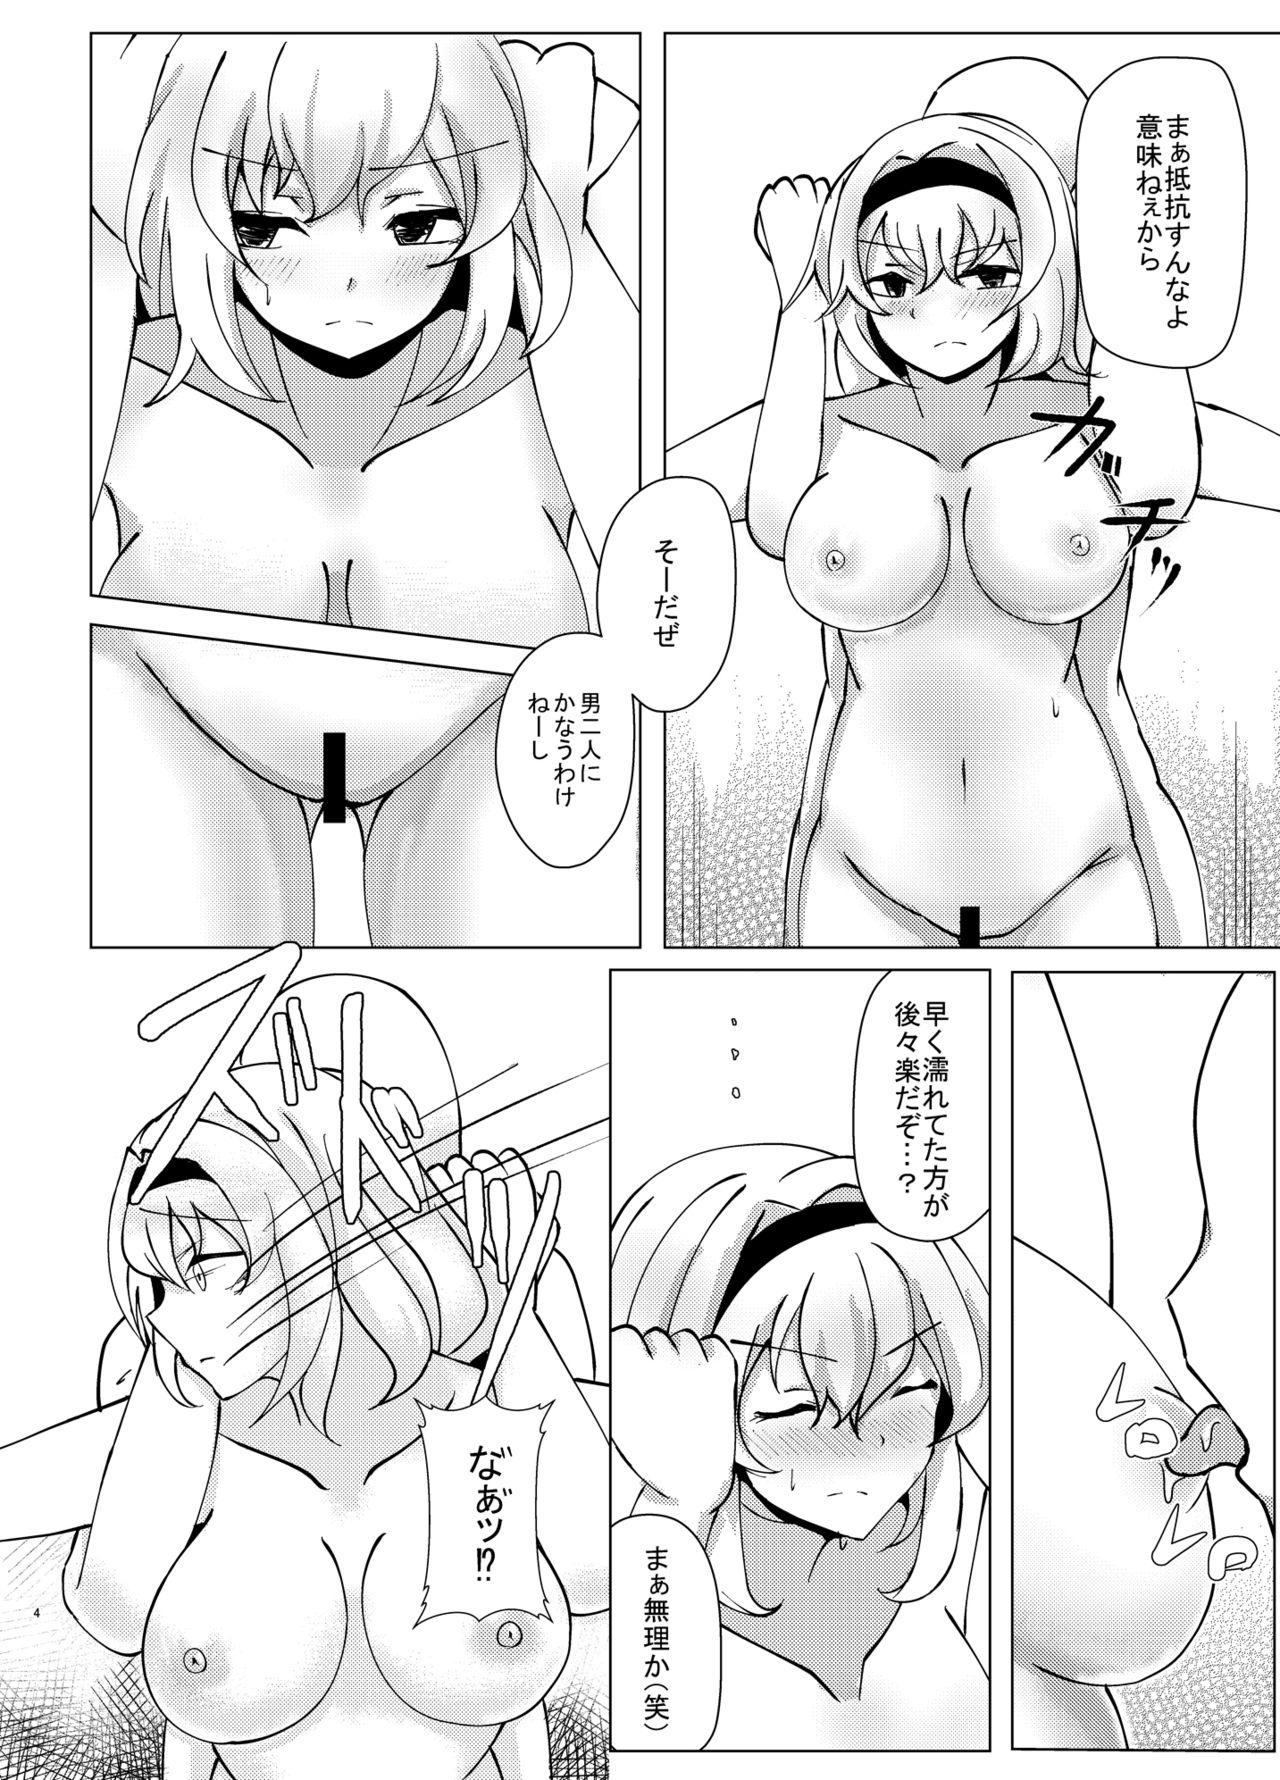 Amateur Blowjob ー耐えたら何とかなる？ - Touhou project Alternative - Page 4